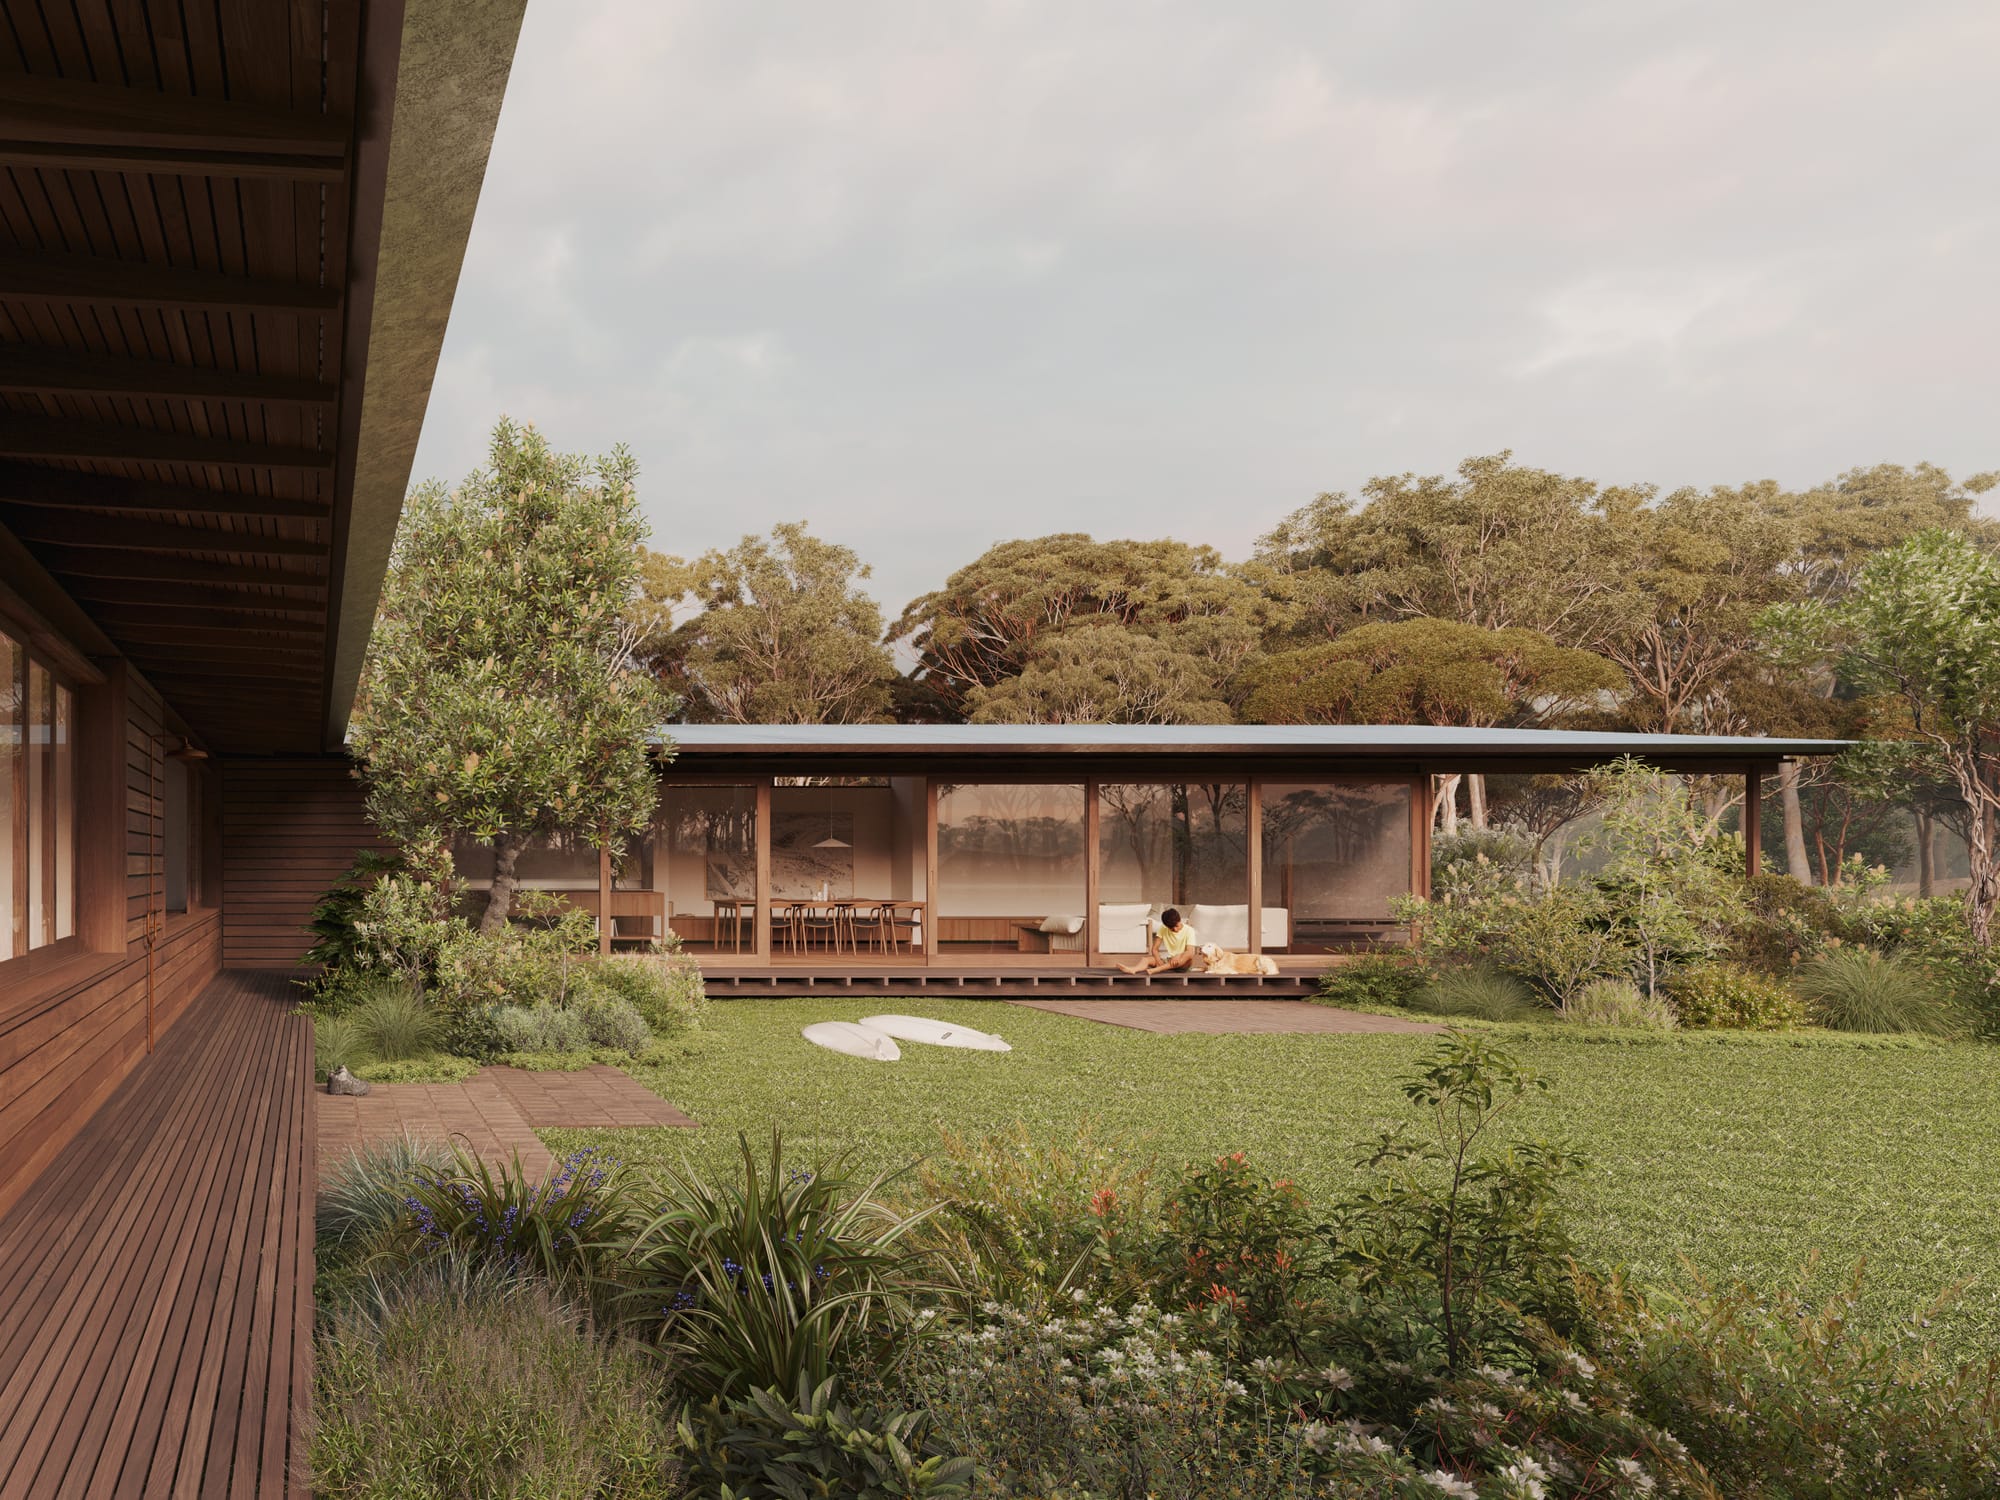 Corymbia House. Renders copyright of CHOIRENDER. Pavillion home with timber decking and grass garden. Native Australian trees in background.